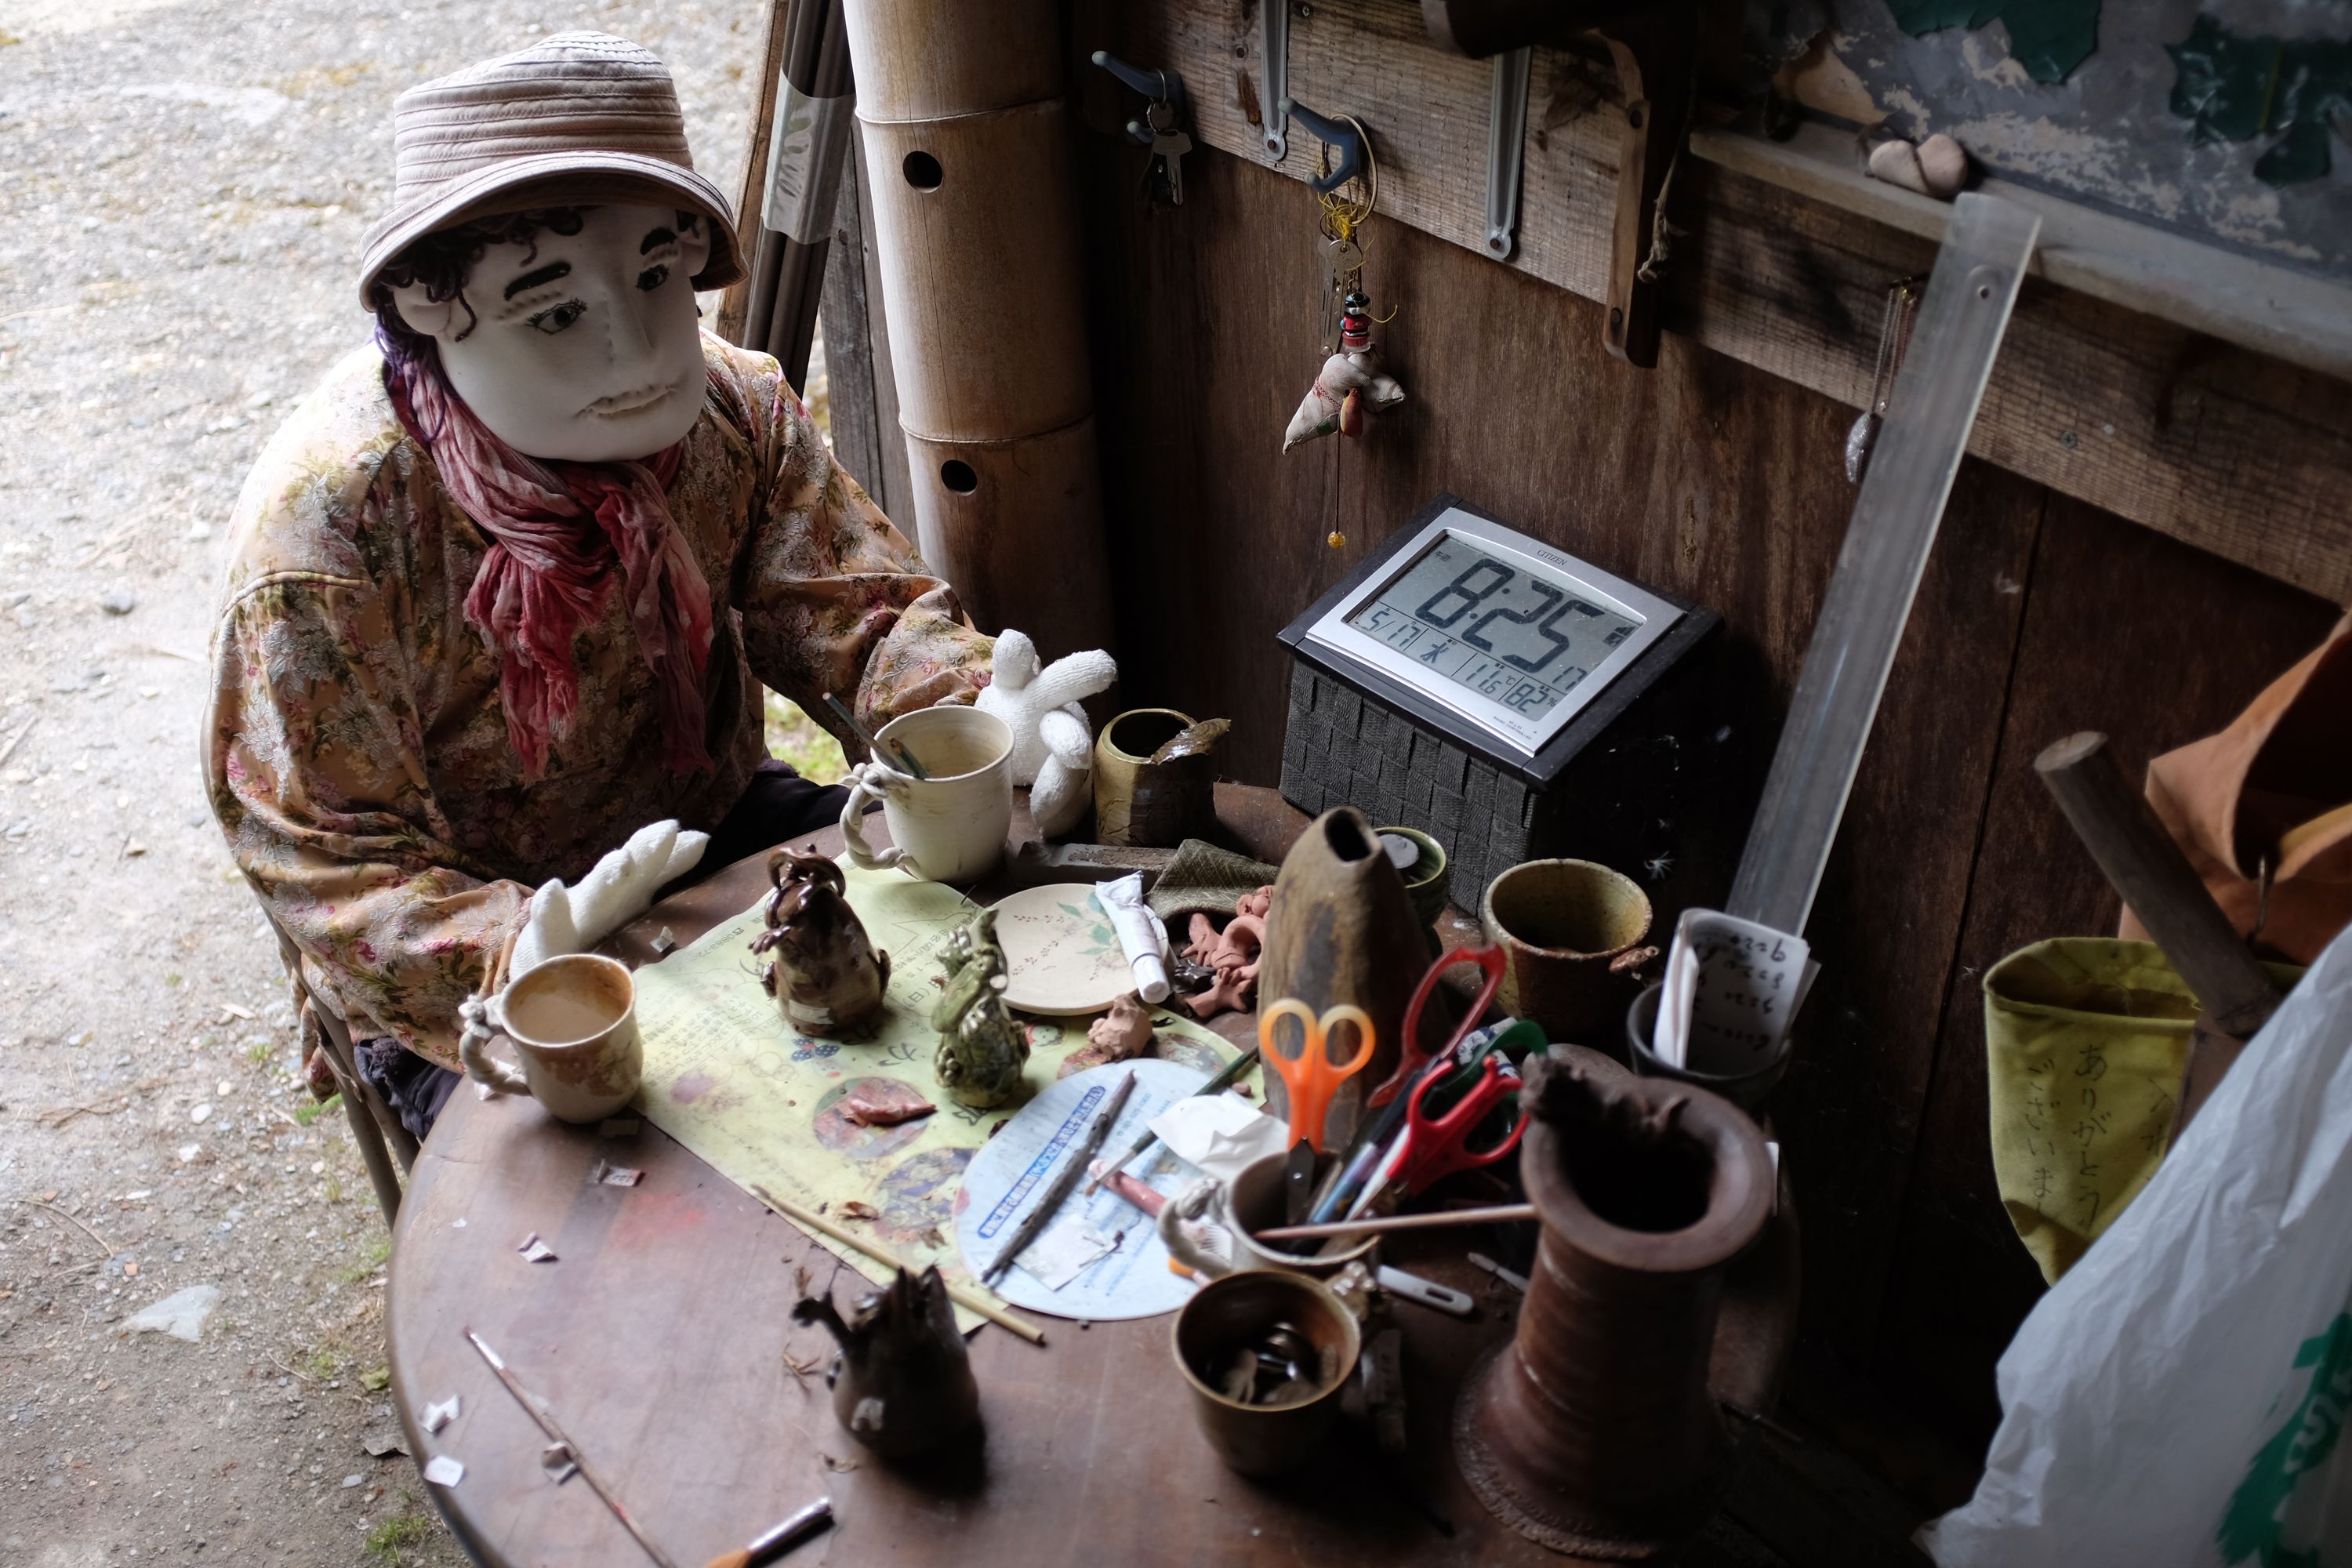 A doll sits at a low worktable with mugs and various tools laid out on it.